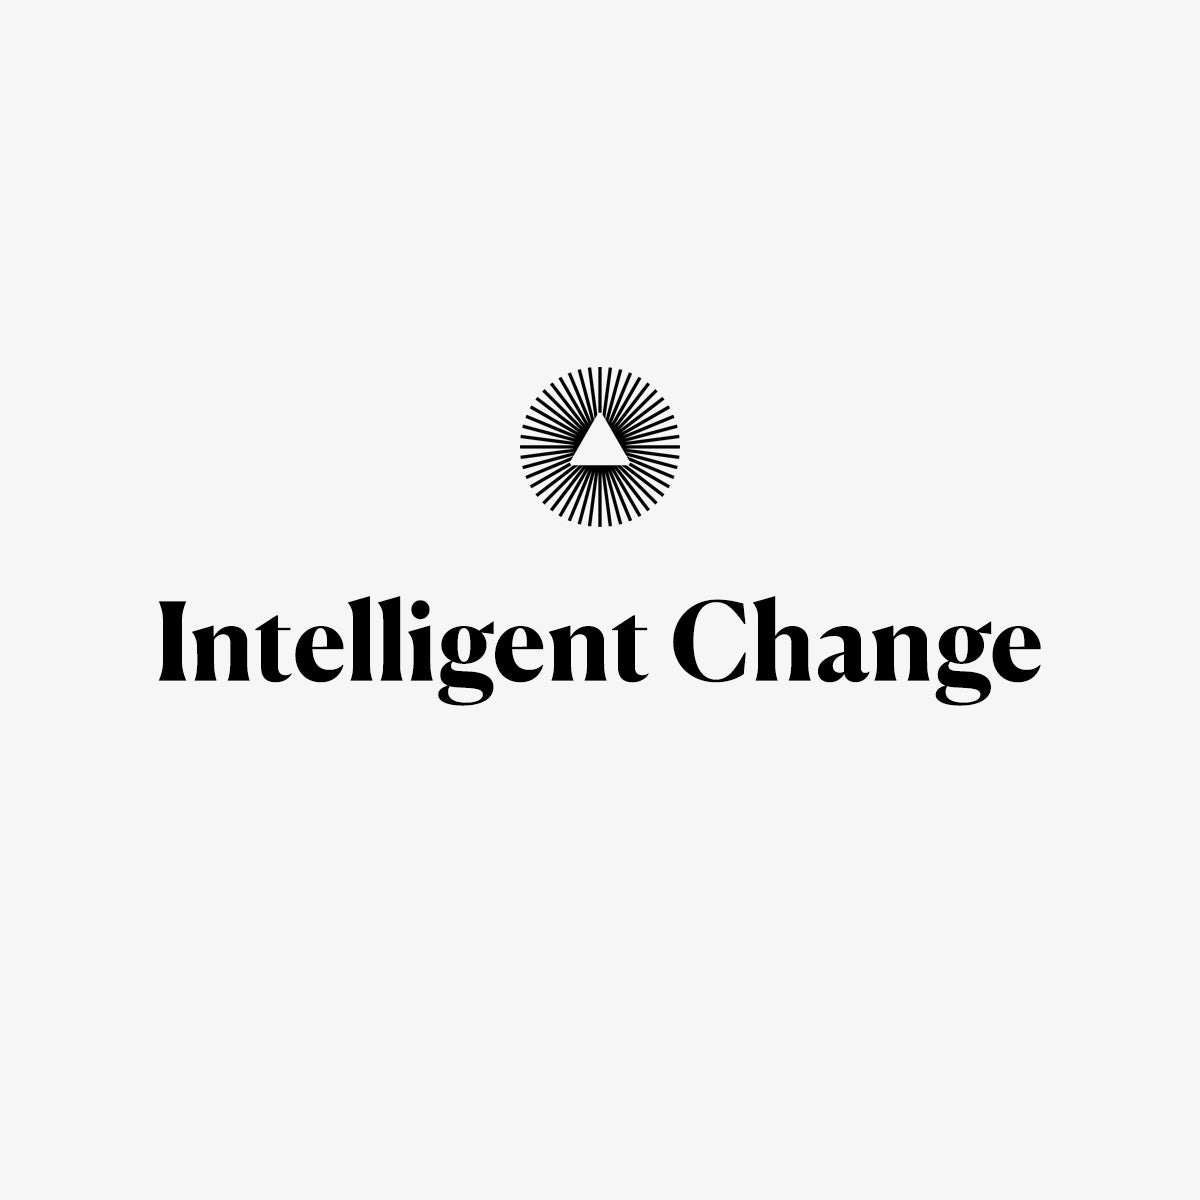 Intelligent Change - Tools to Positively Change Your Life